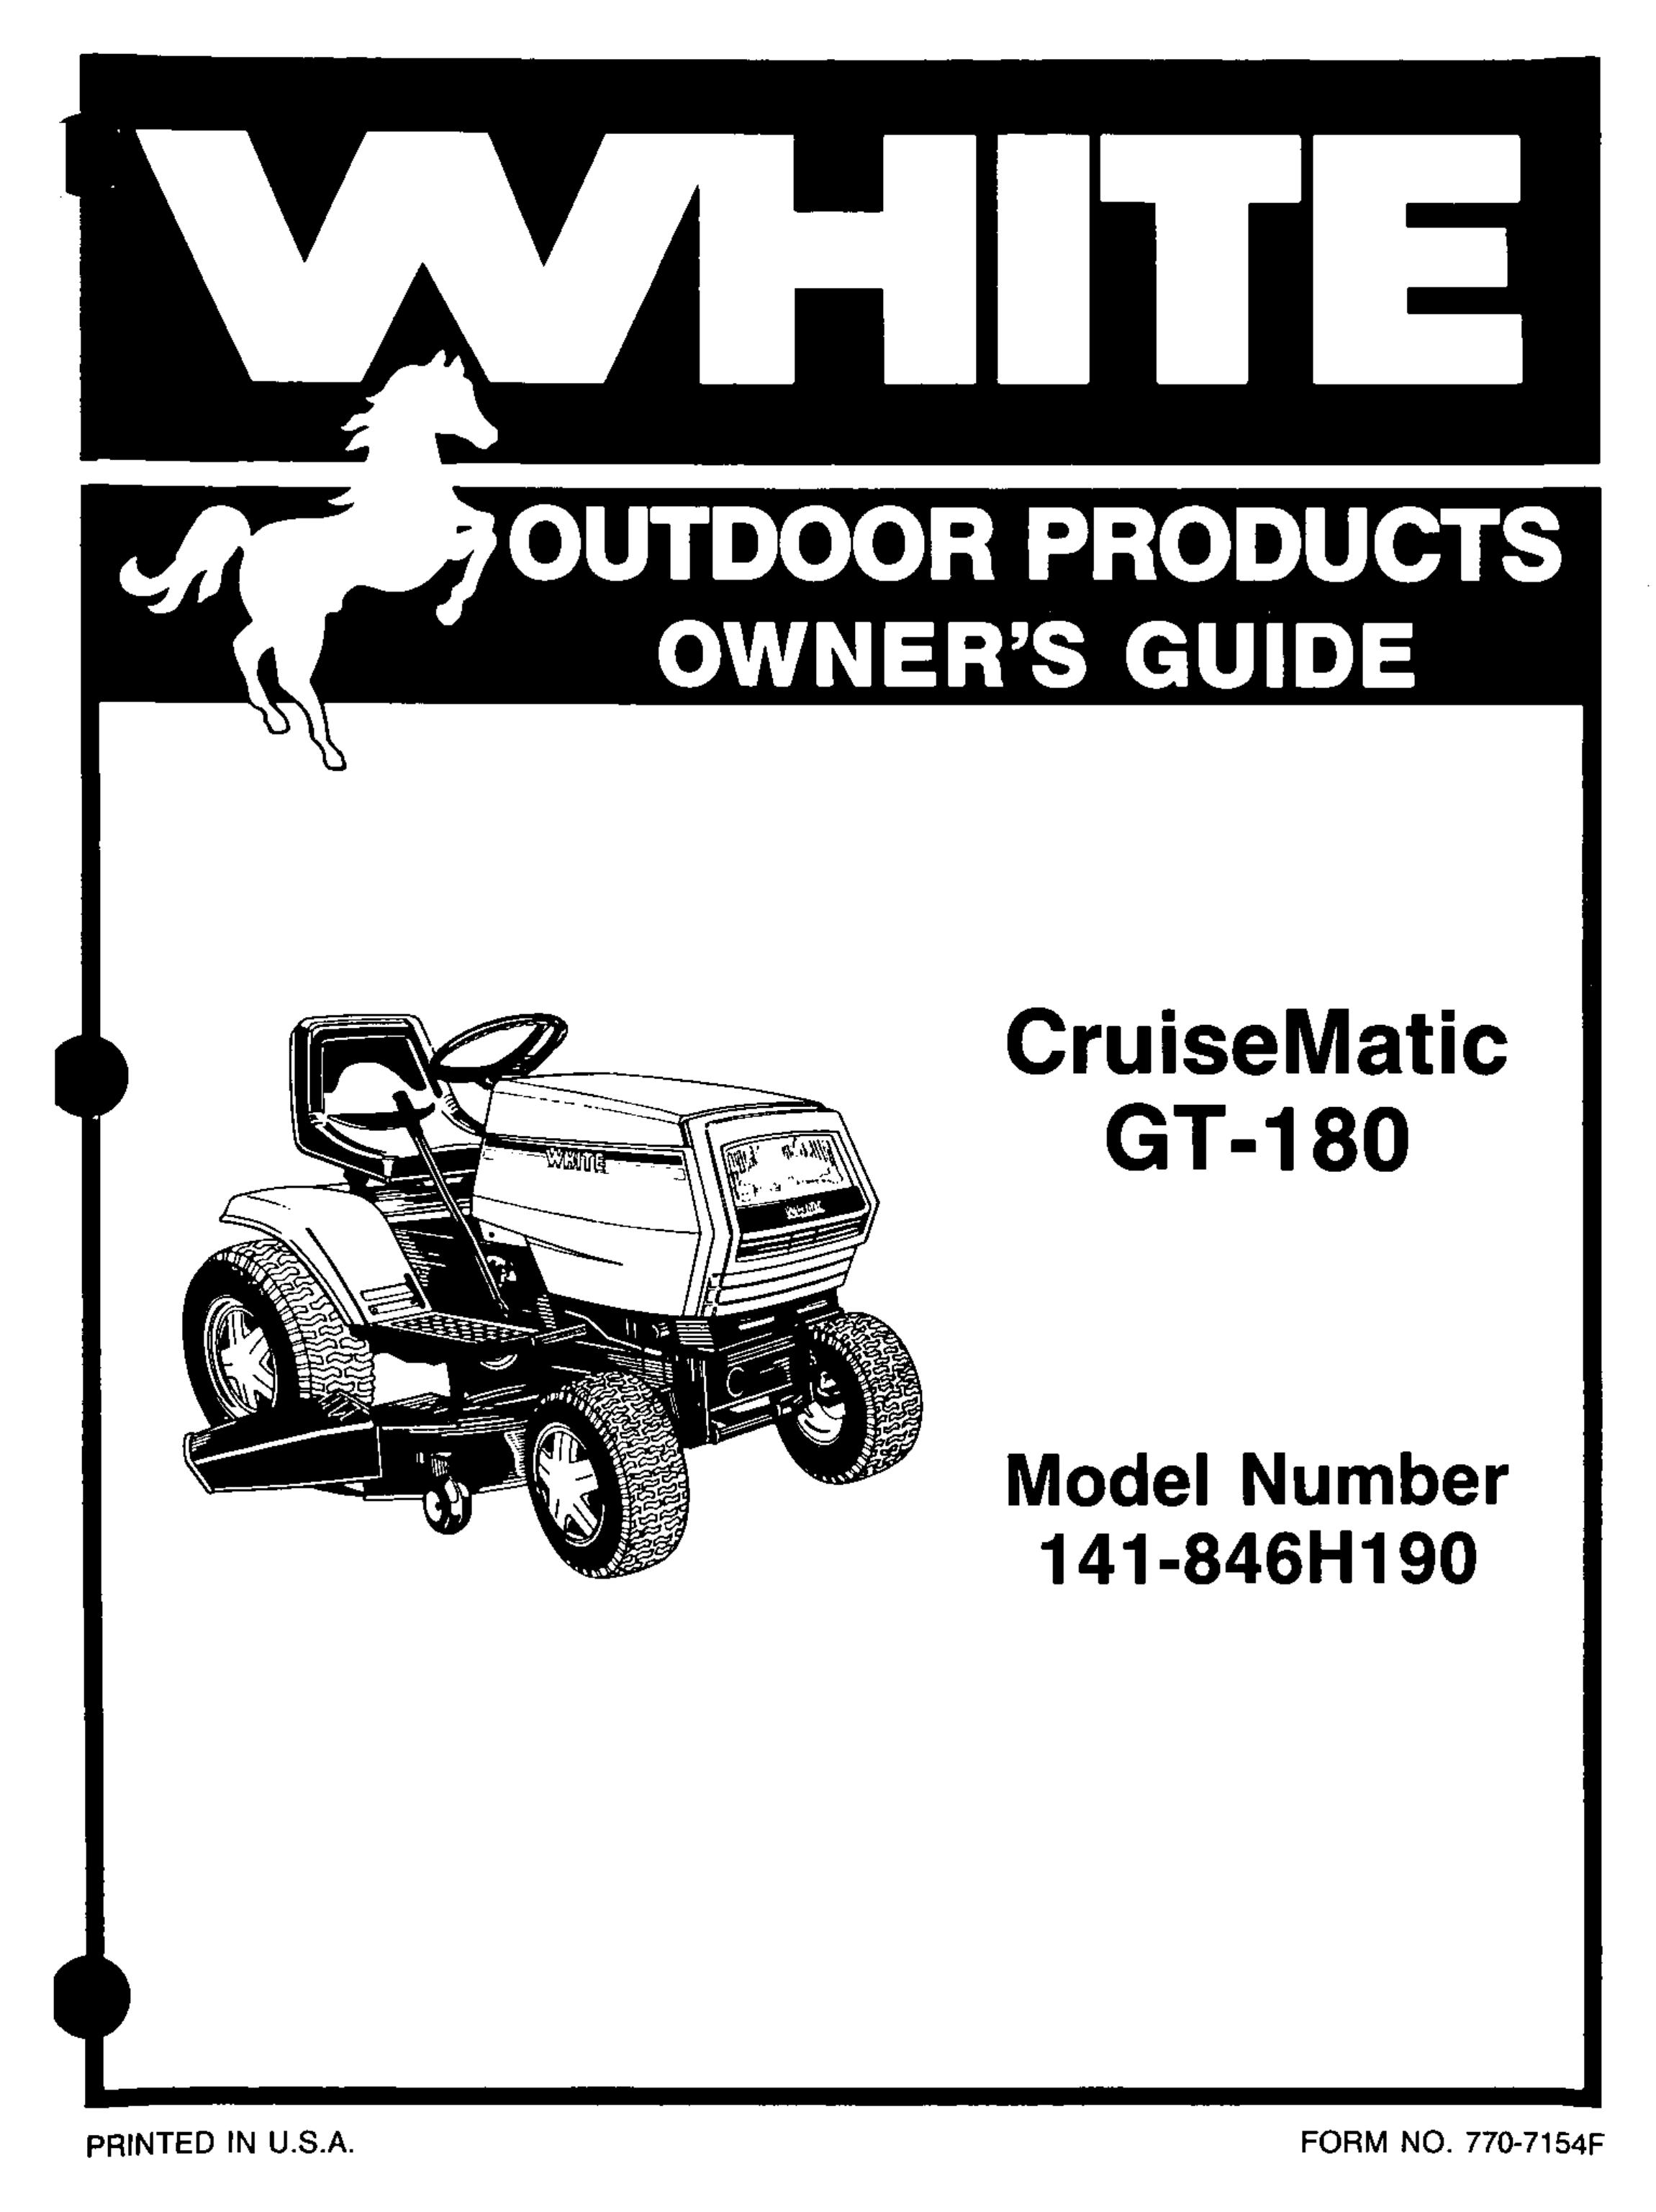 White Outdoor 141-846H190 Lawn Mower User Manual